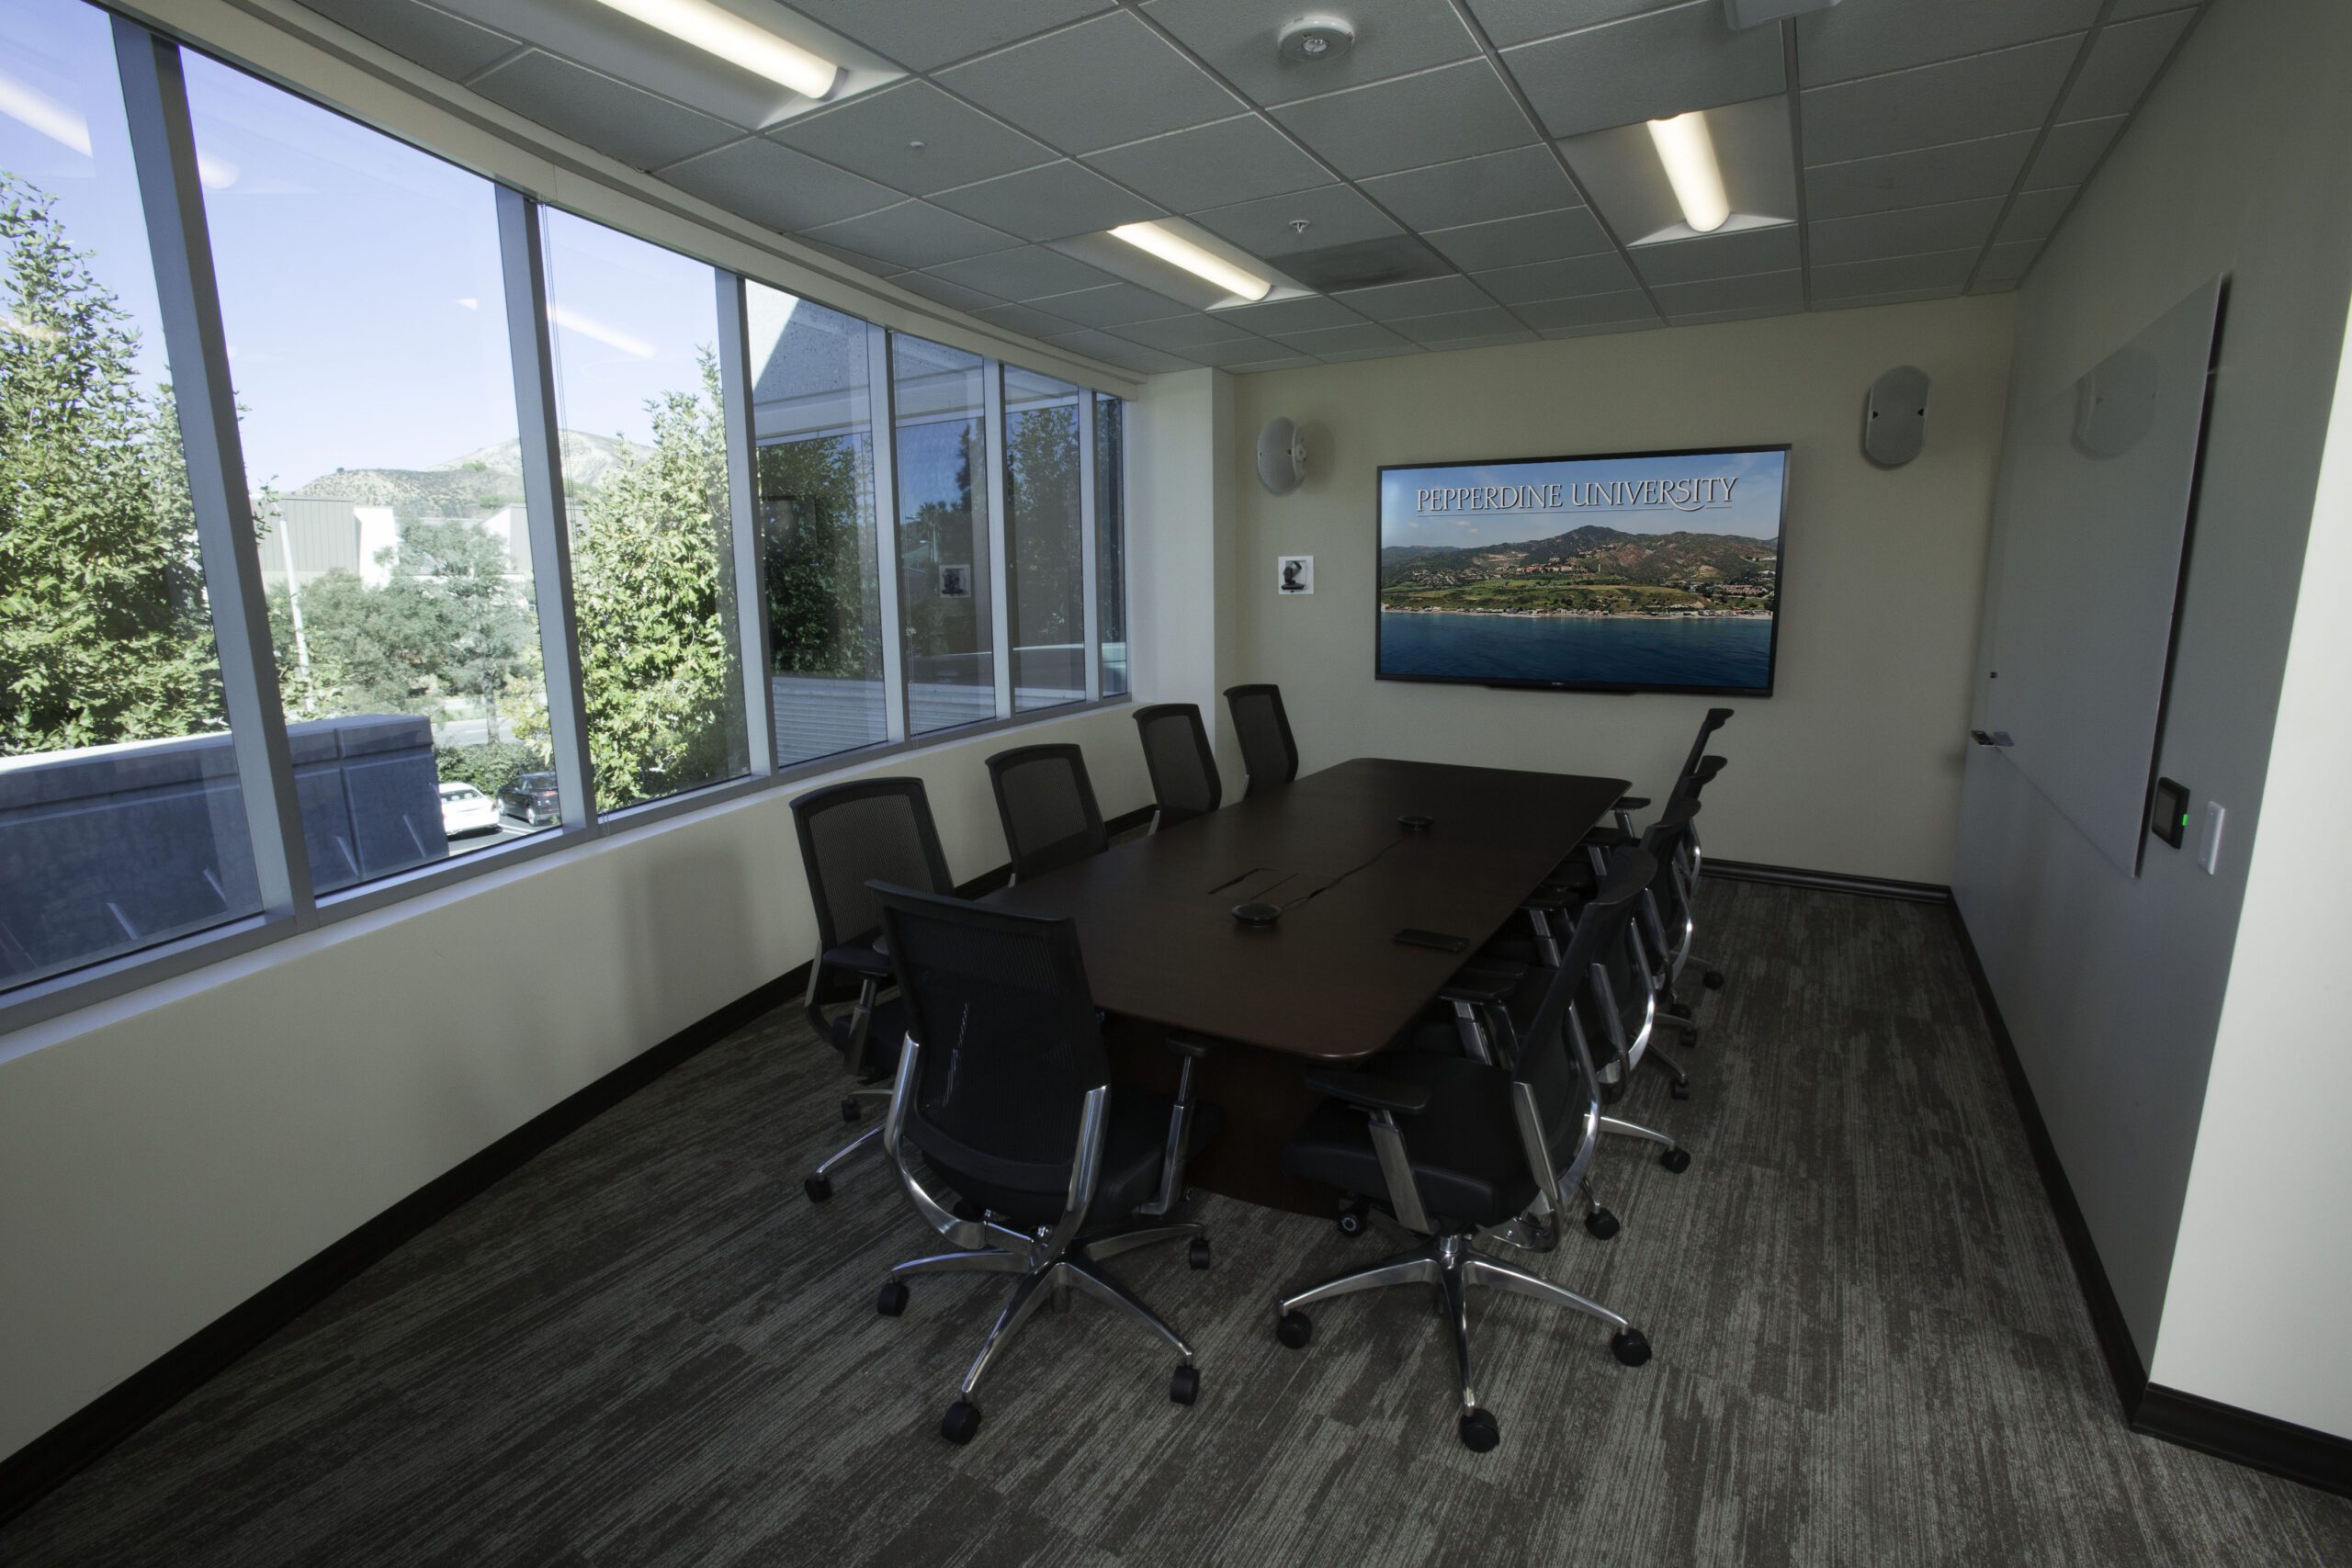 Sharp 90" displays provide great viewing quality in smaller meeting rooms.